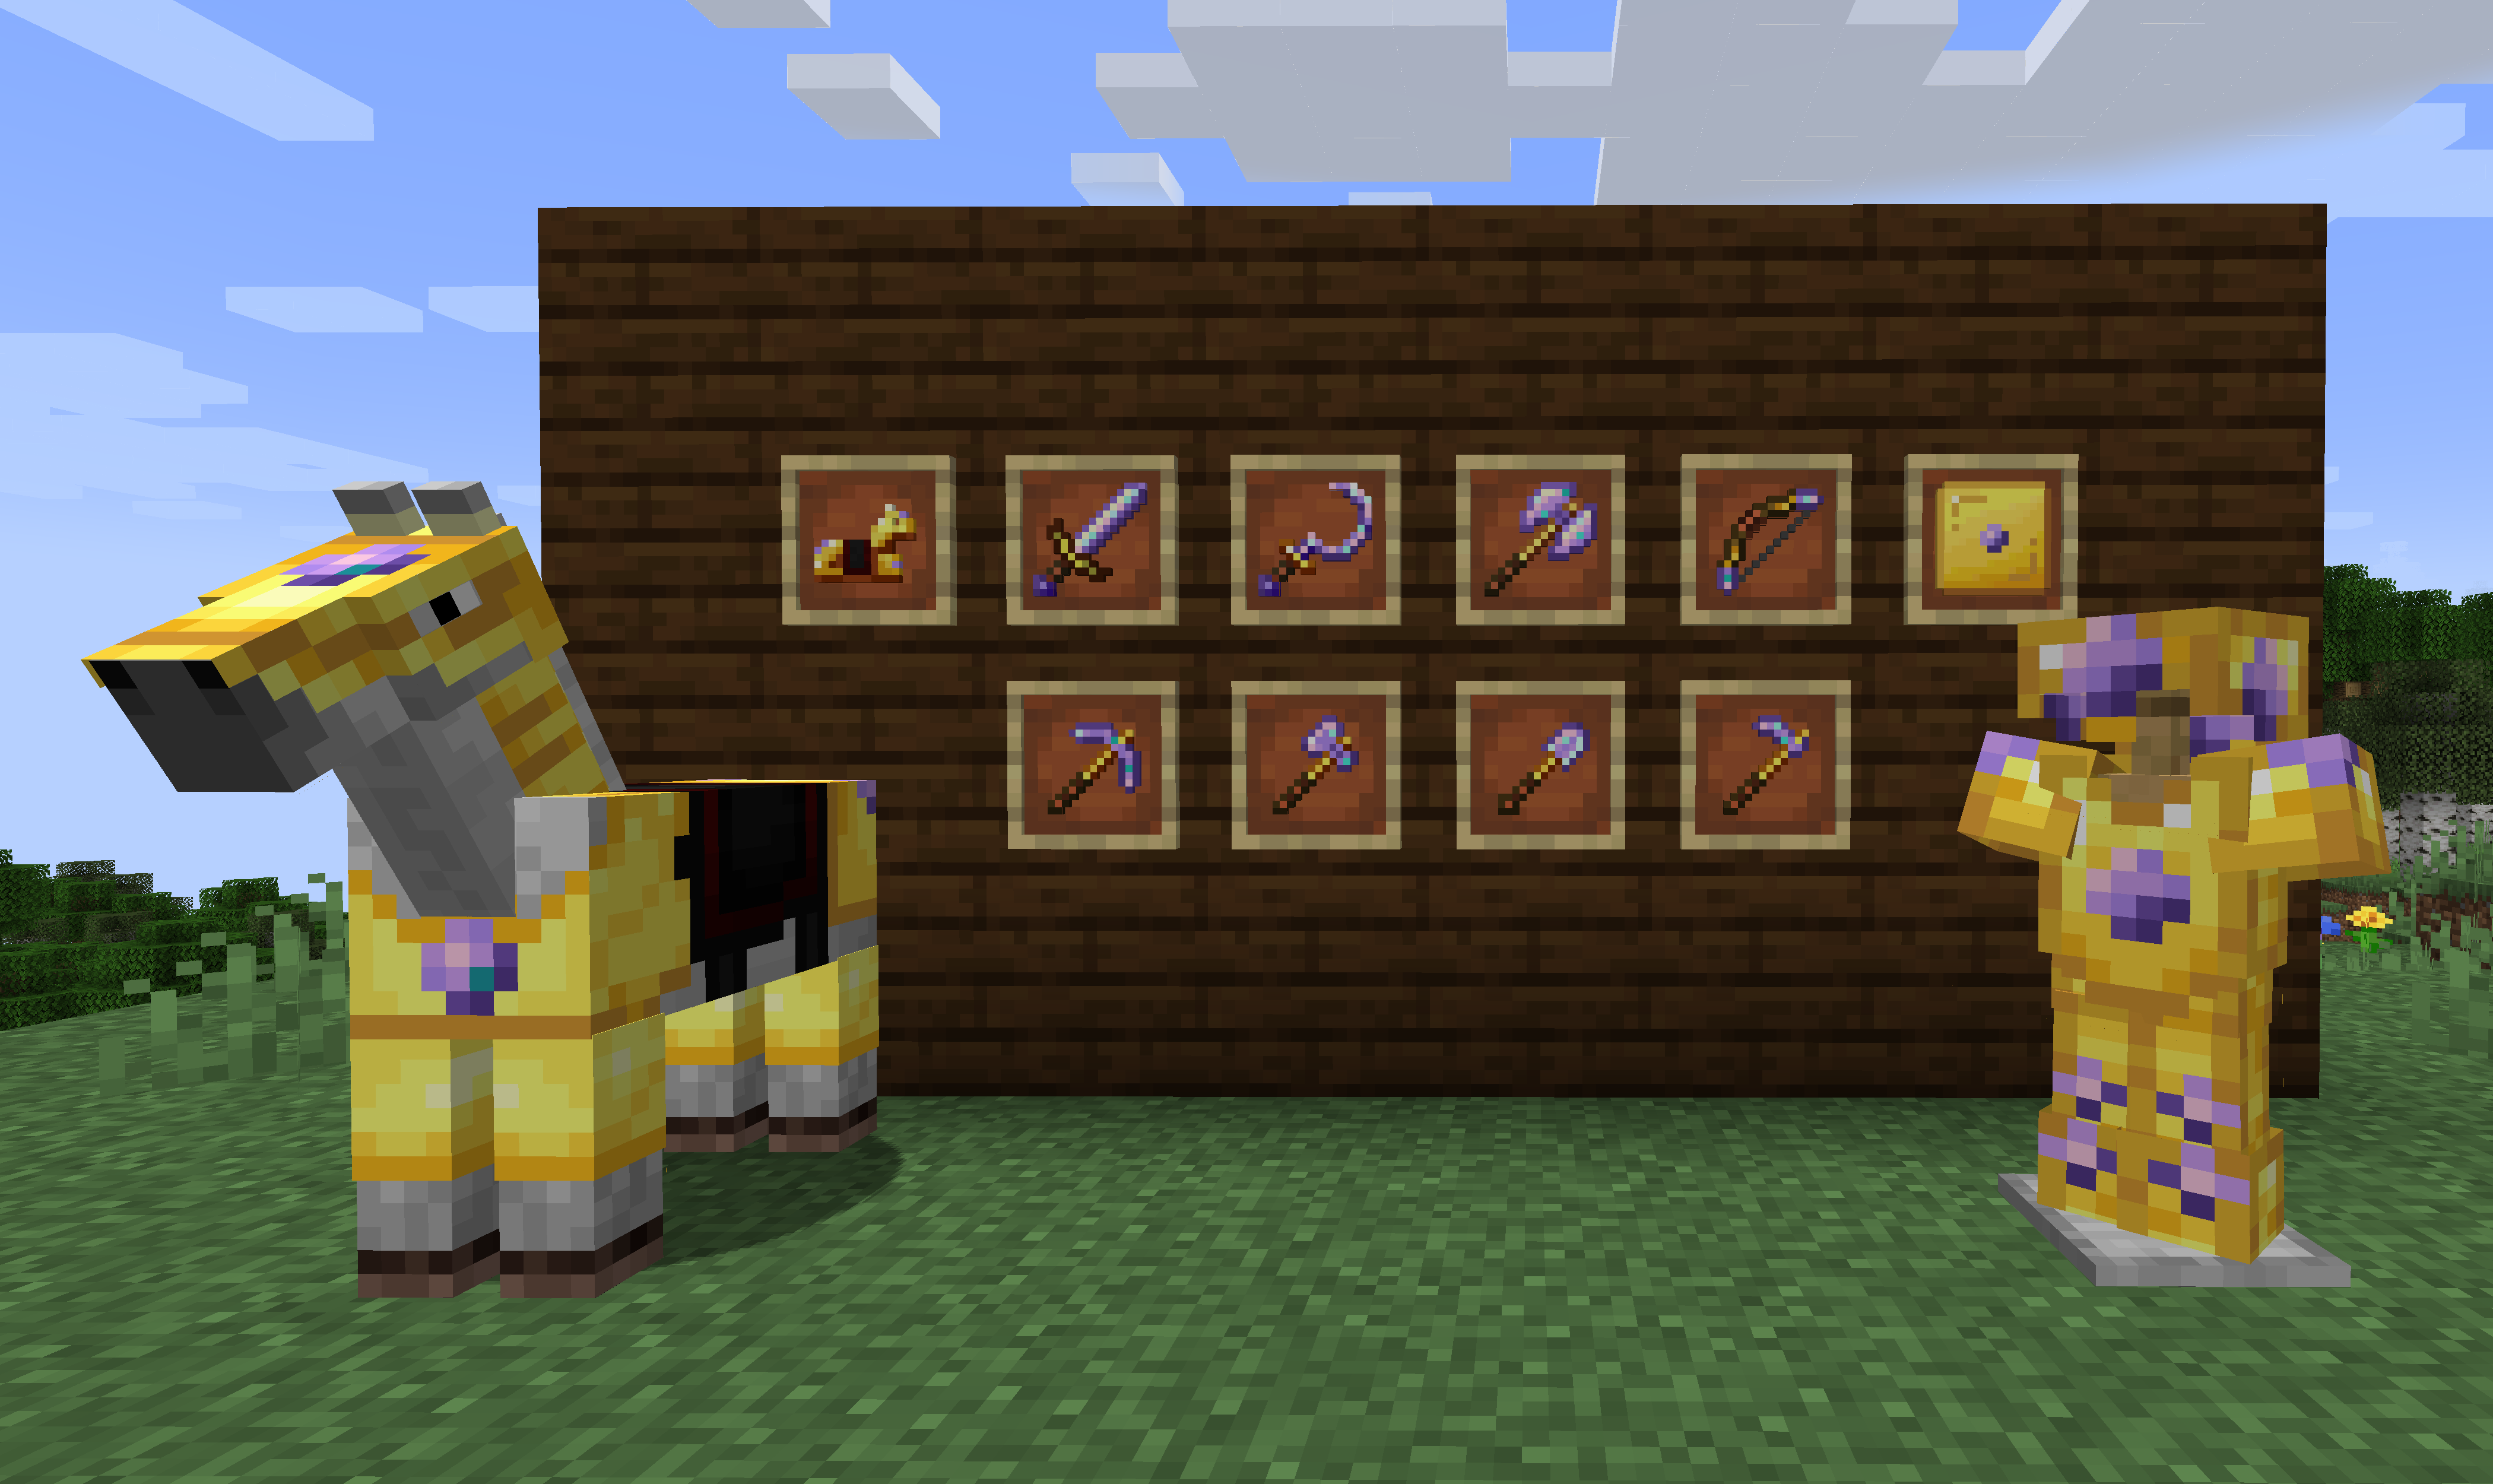 Diamethyst Gold Weapons, Tools, and Armor.